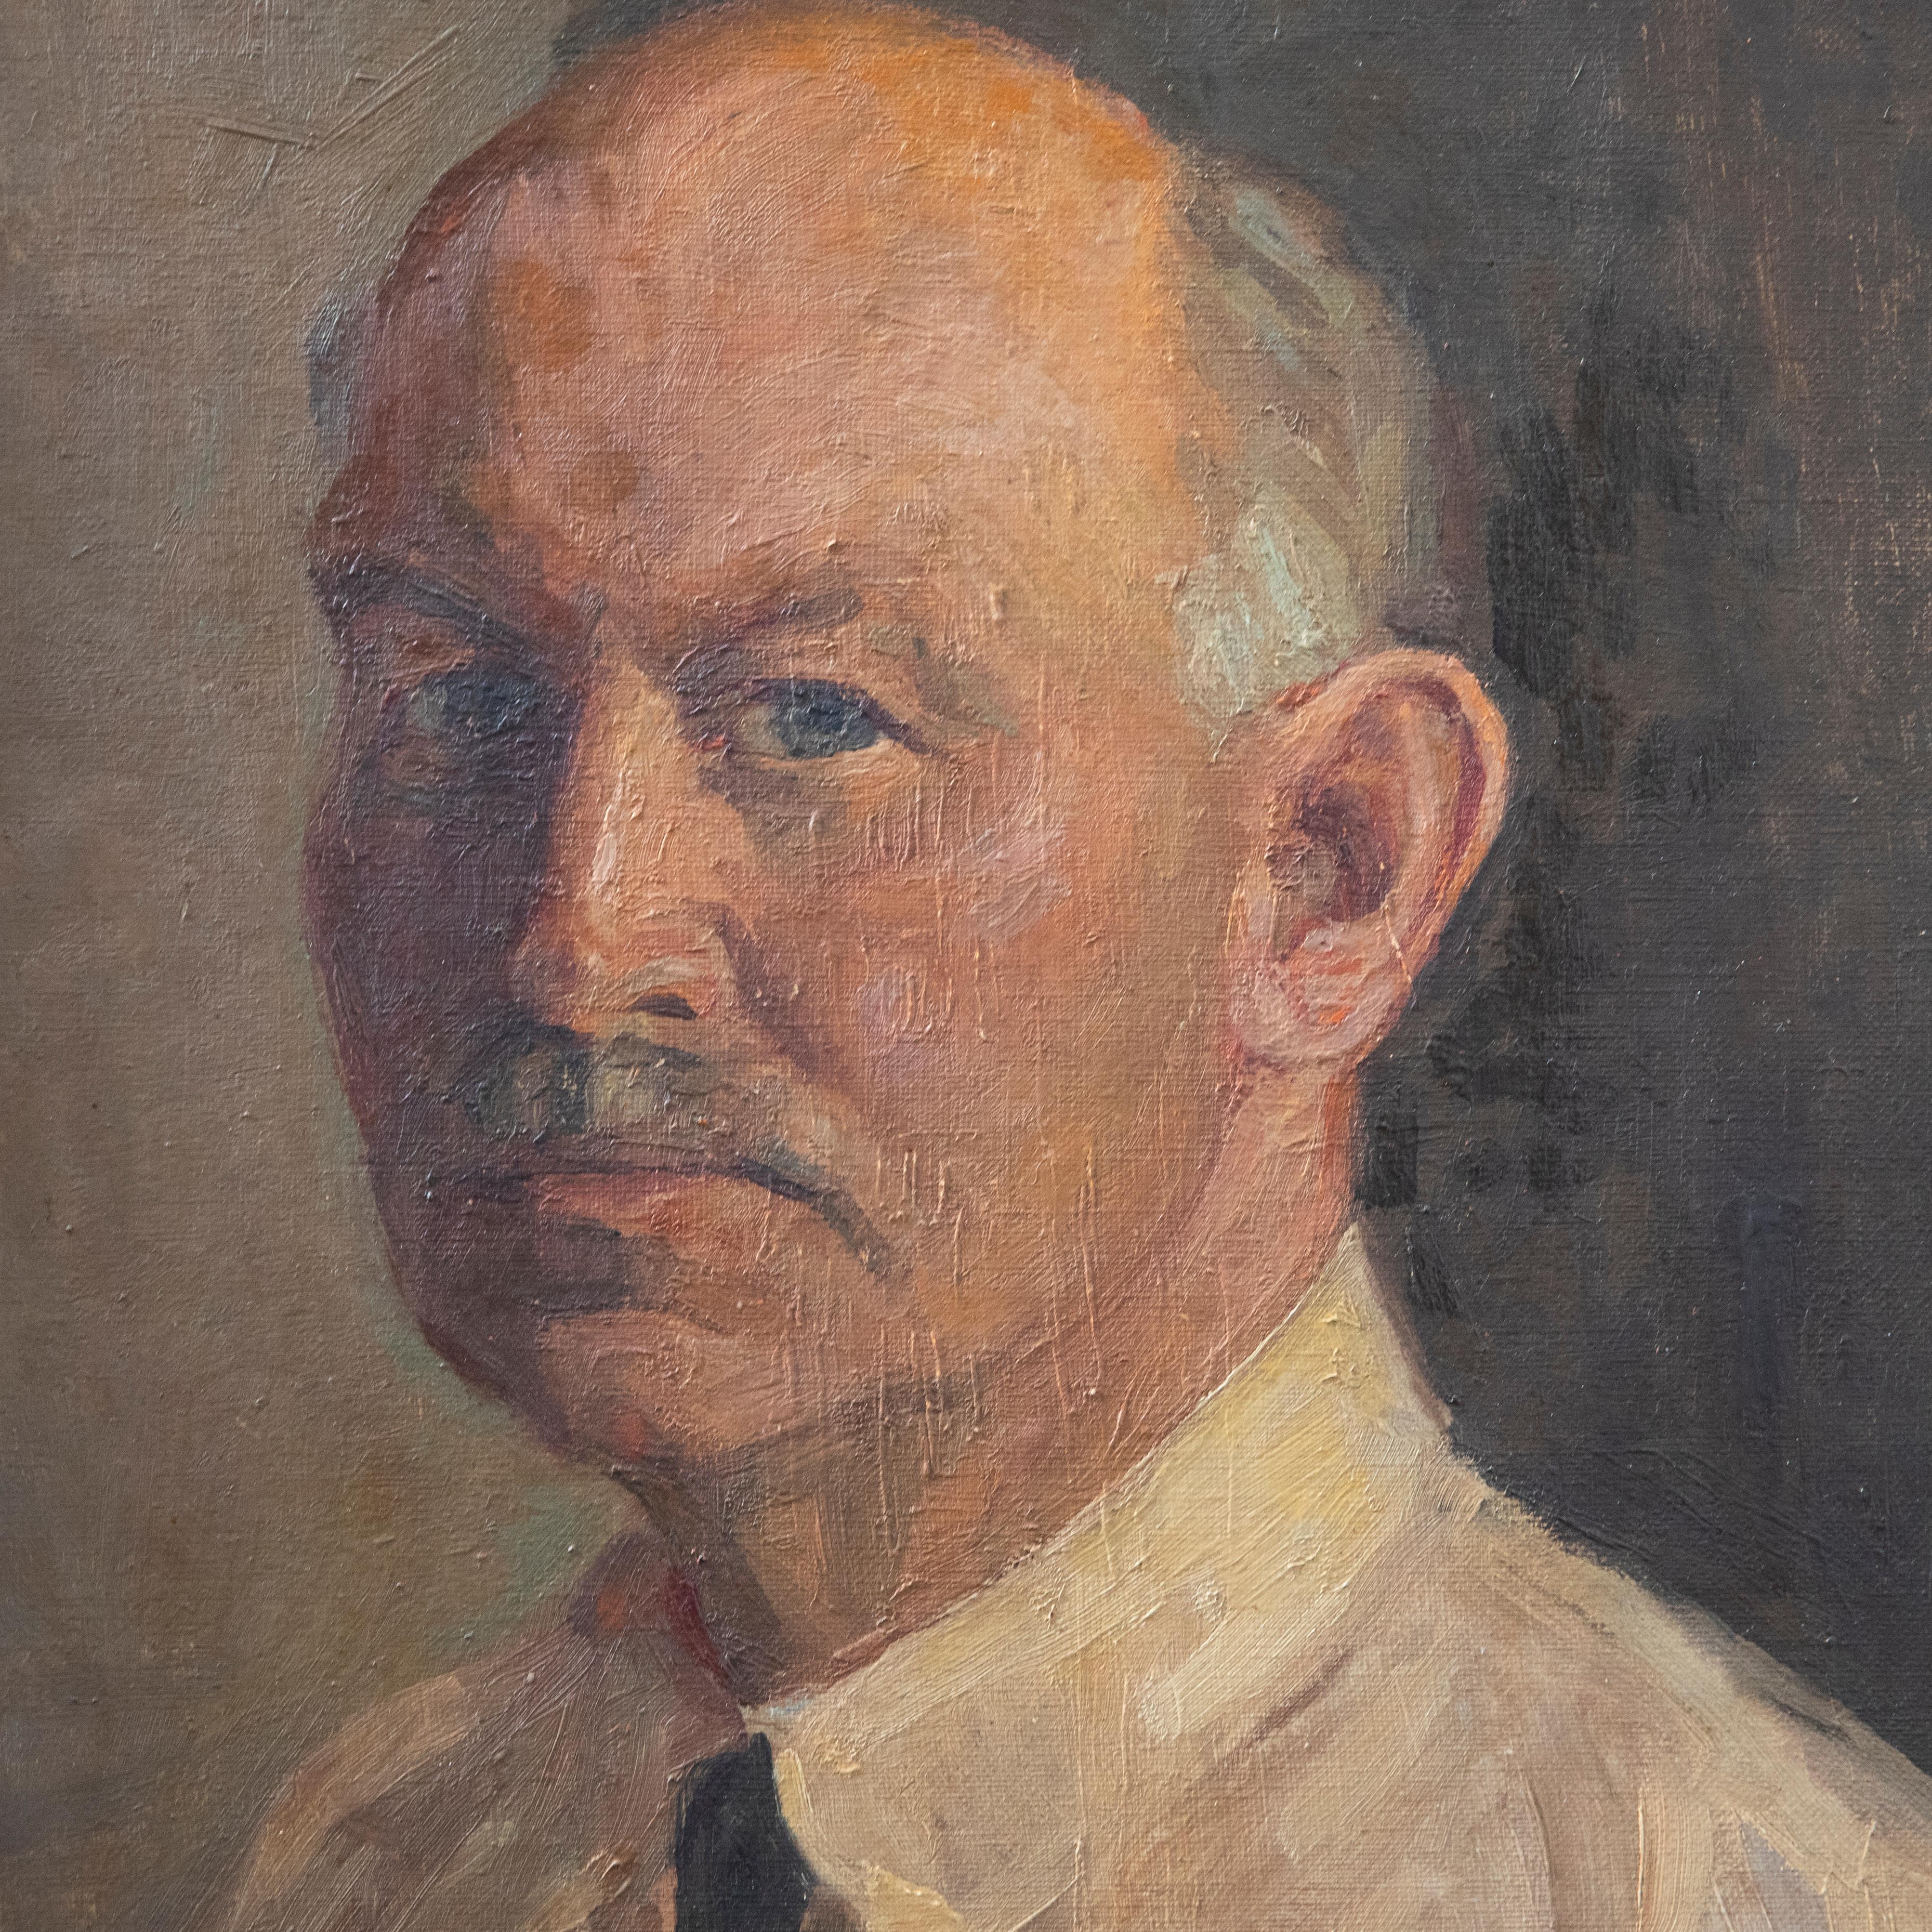 A fine 1937 oil portrait depicting a gentlemen with a mustache and tie, in a painterly style typical of the period. There is a modern inscription to the reverse reading 'Ringling of Ringling Bros Circus', however we have been unable to confirm this.